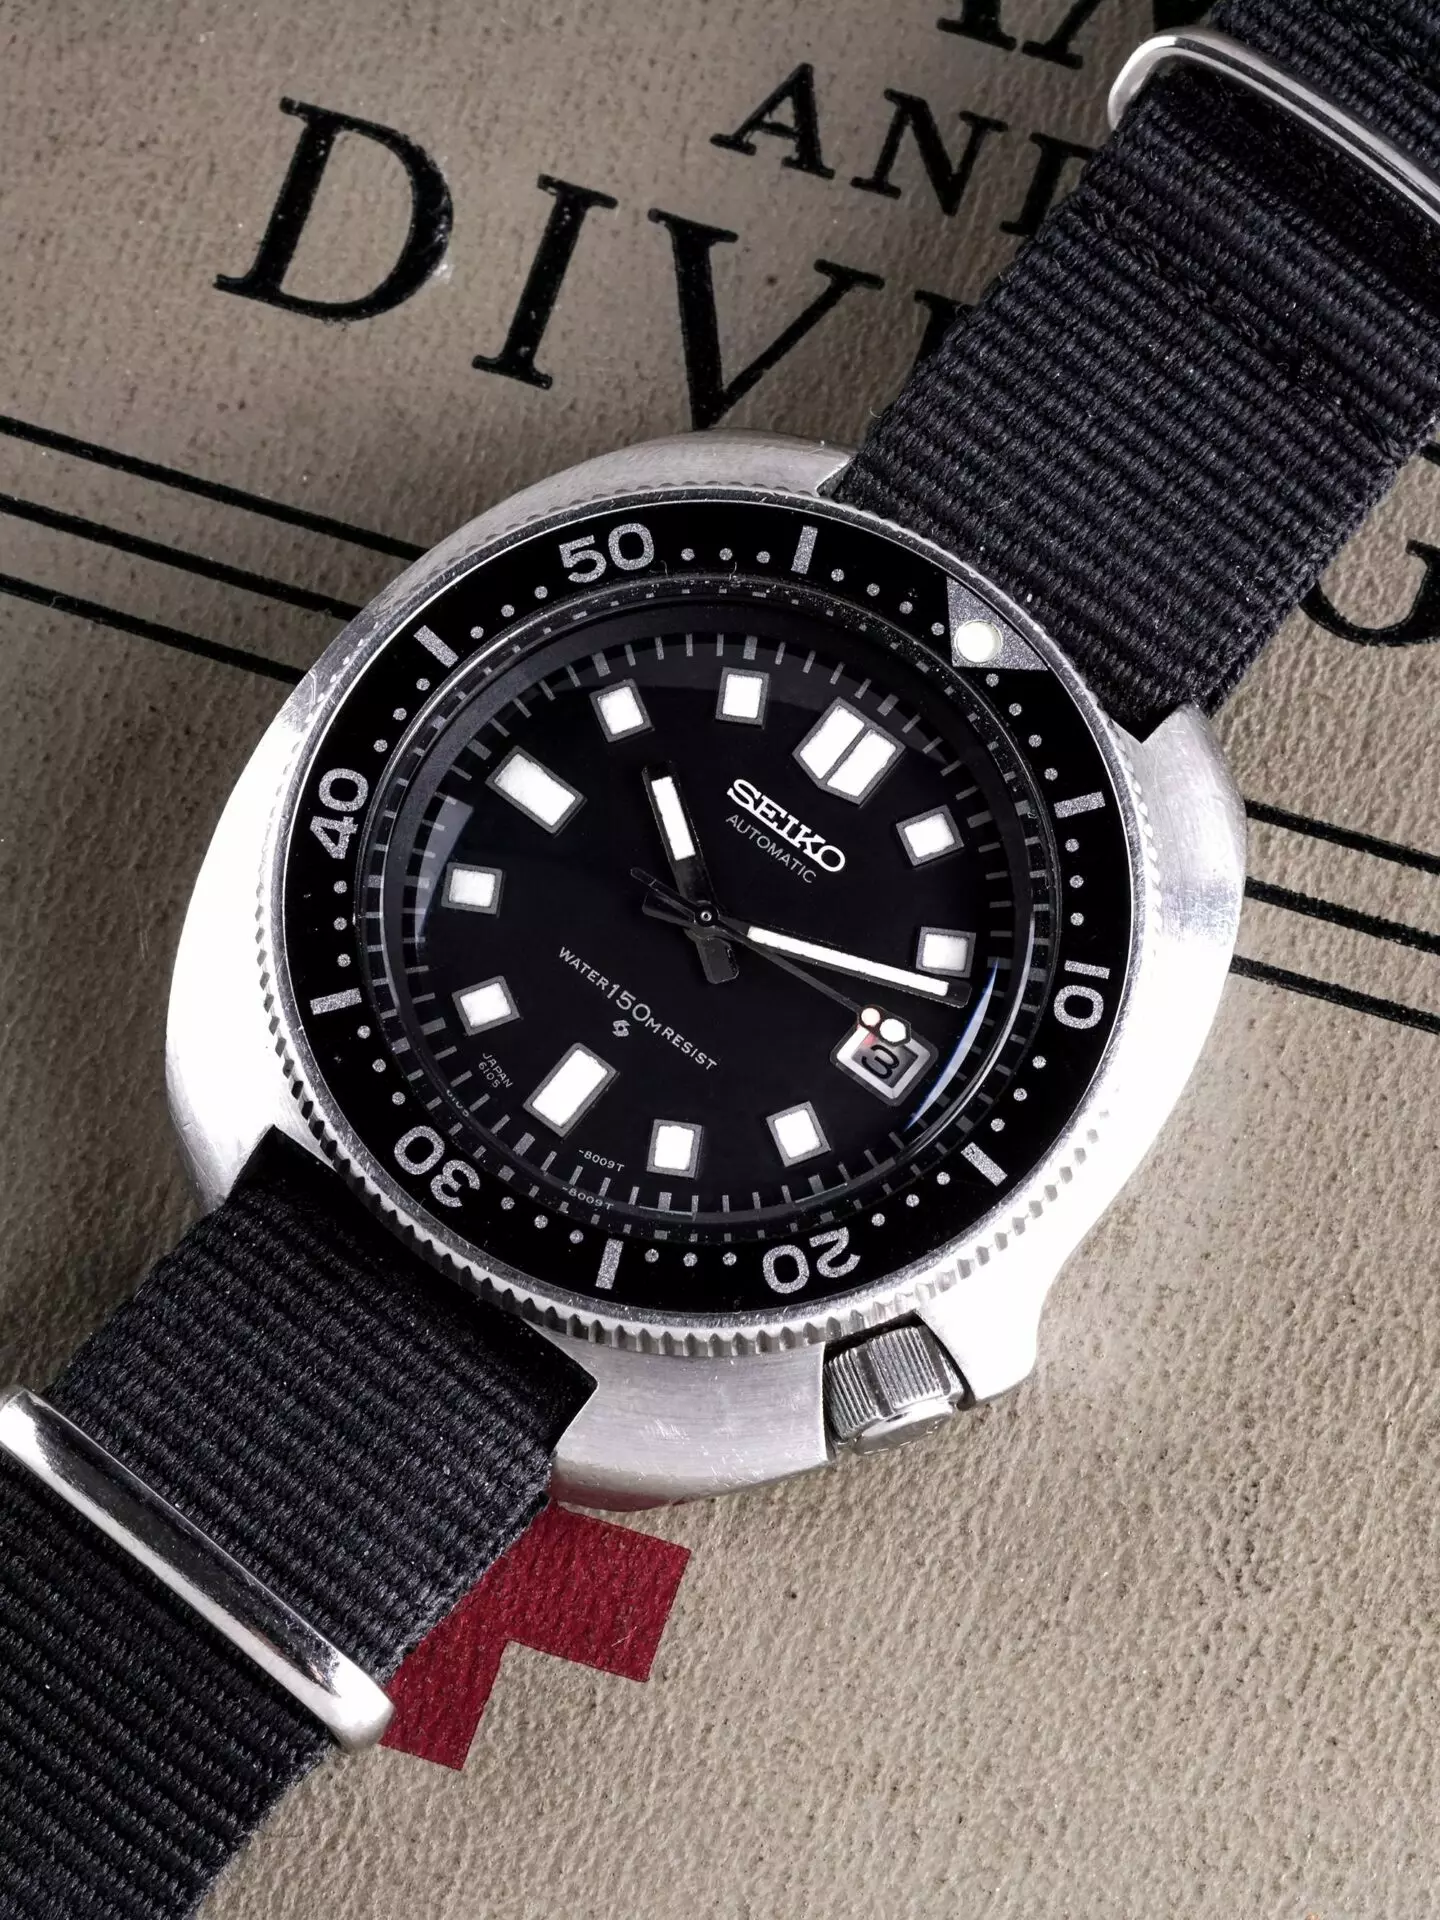 The Seiko Turtle: True Icon of the Dive Watch World – Craft + Tailored